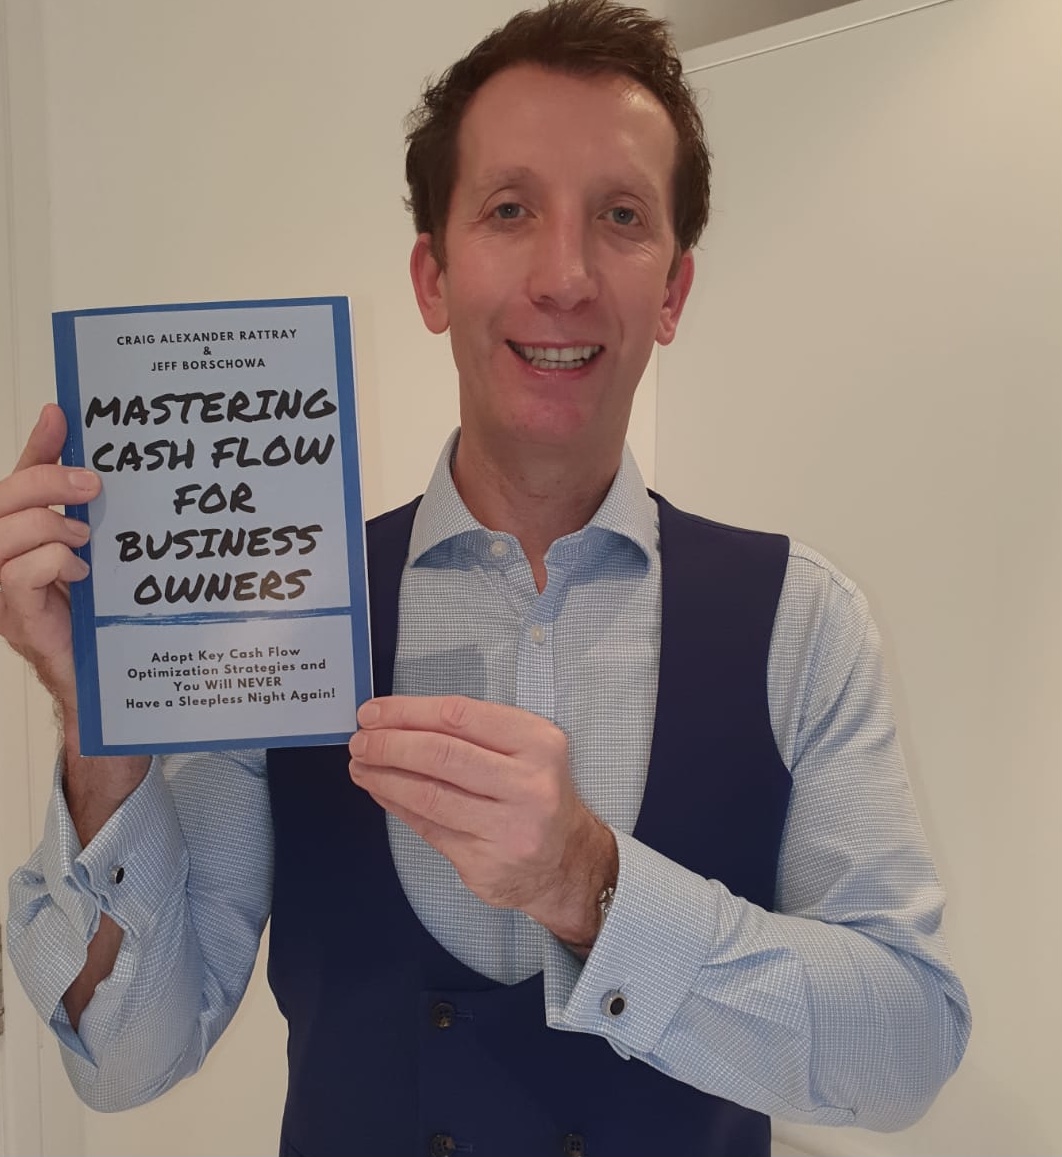 Craig Alexander Rattray's new book on cash flow can be lockdown lifeline for struggling businesses